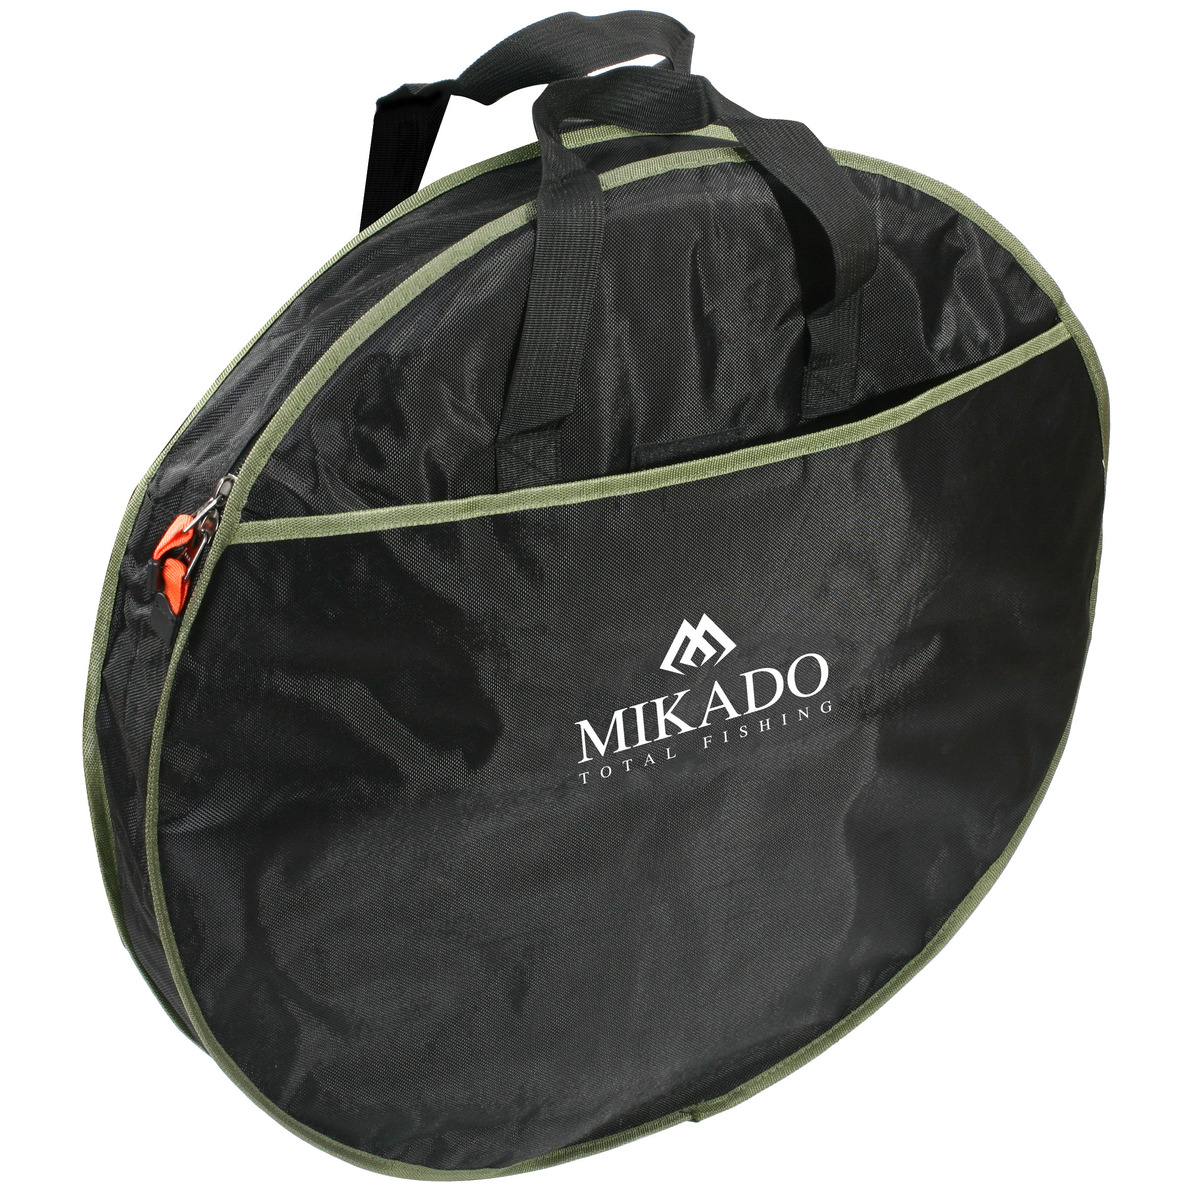 Mikado Bagfor Keepnets 1 Compartment - ROUND (63x8 cm) (N2016)  BLACK AND GREEN